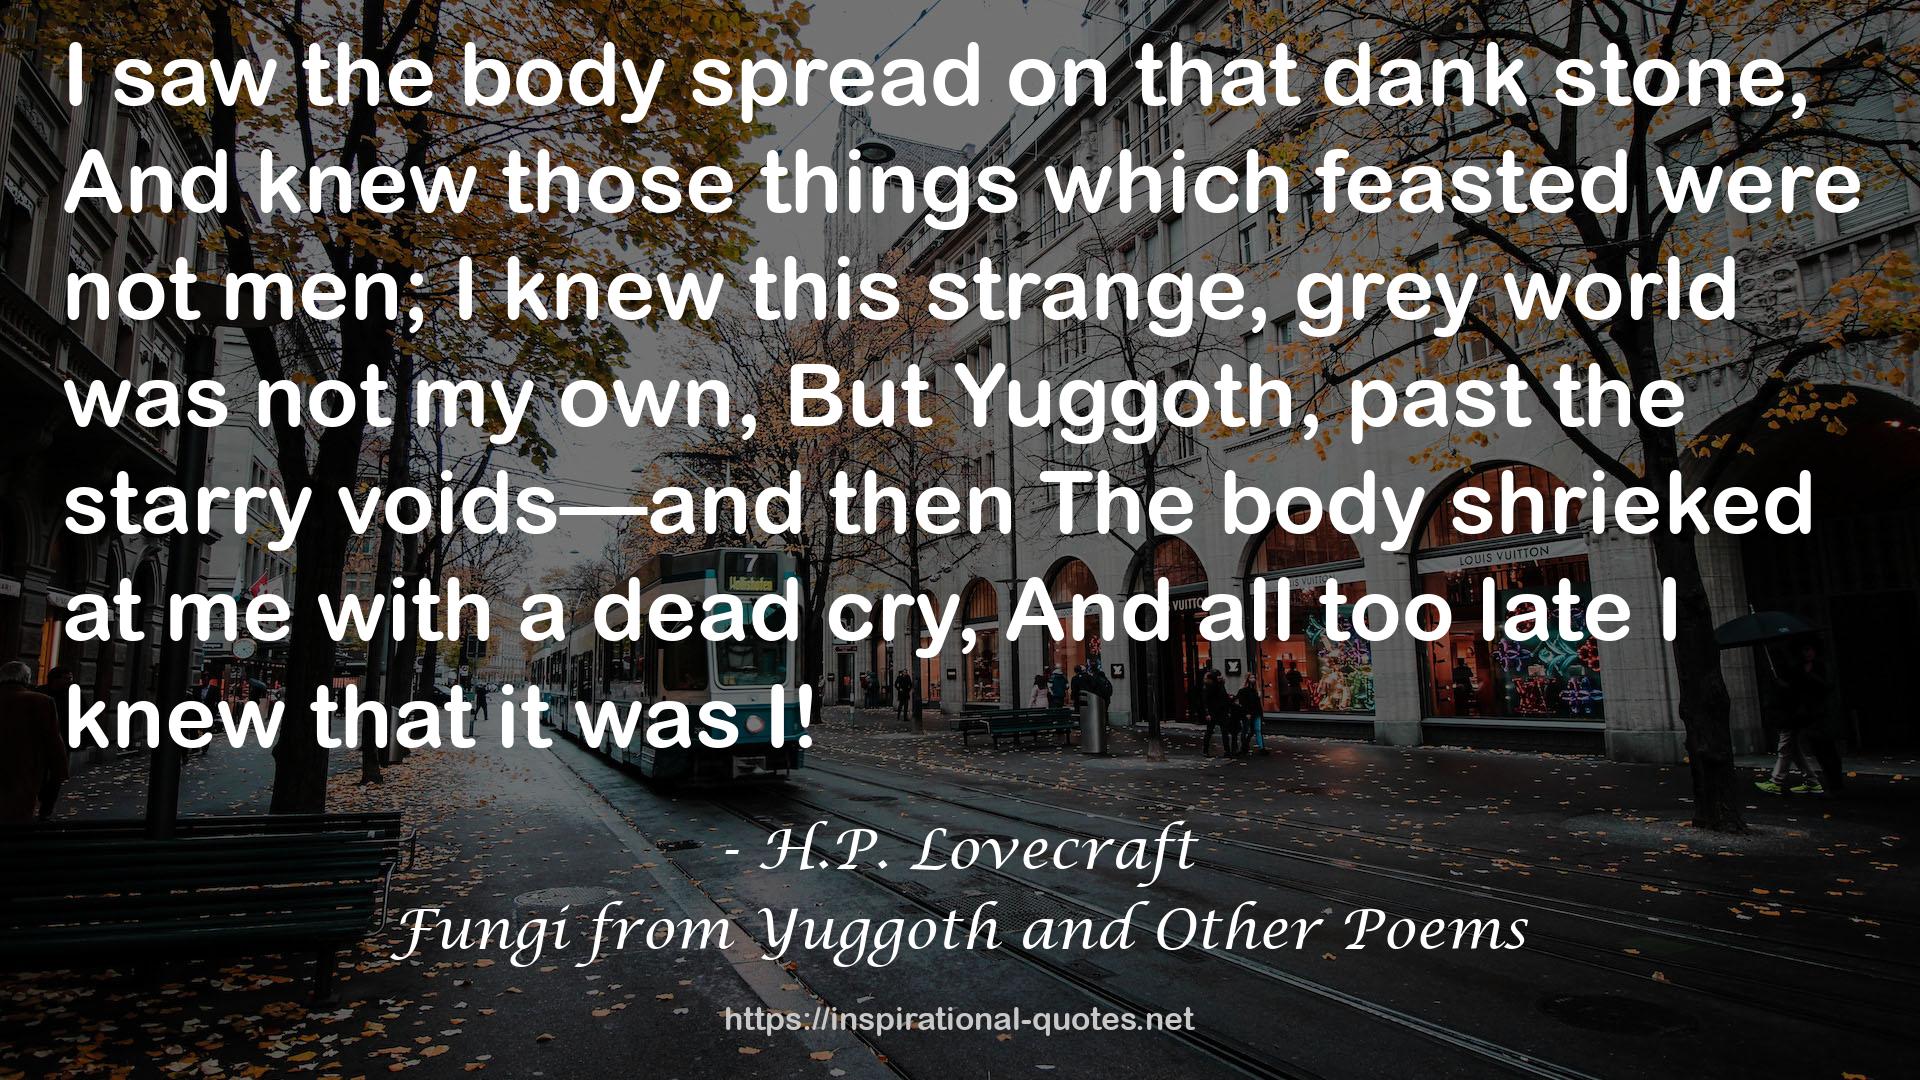 Fungi from Yuggoth and Other Poems QUOTES